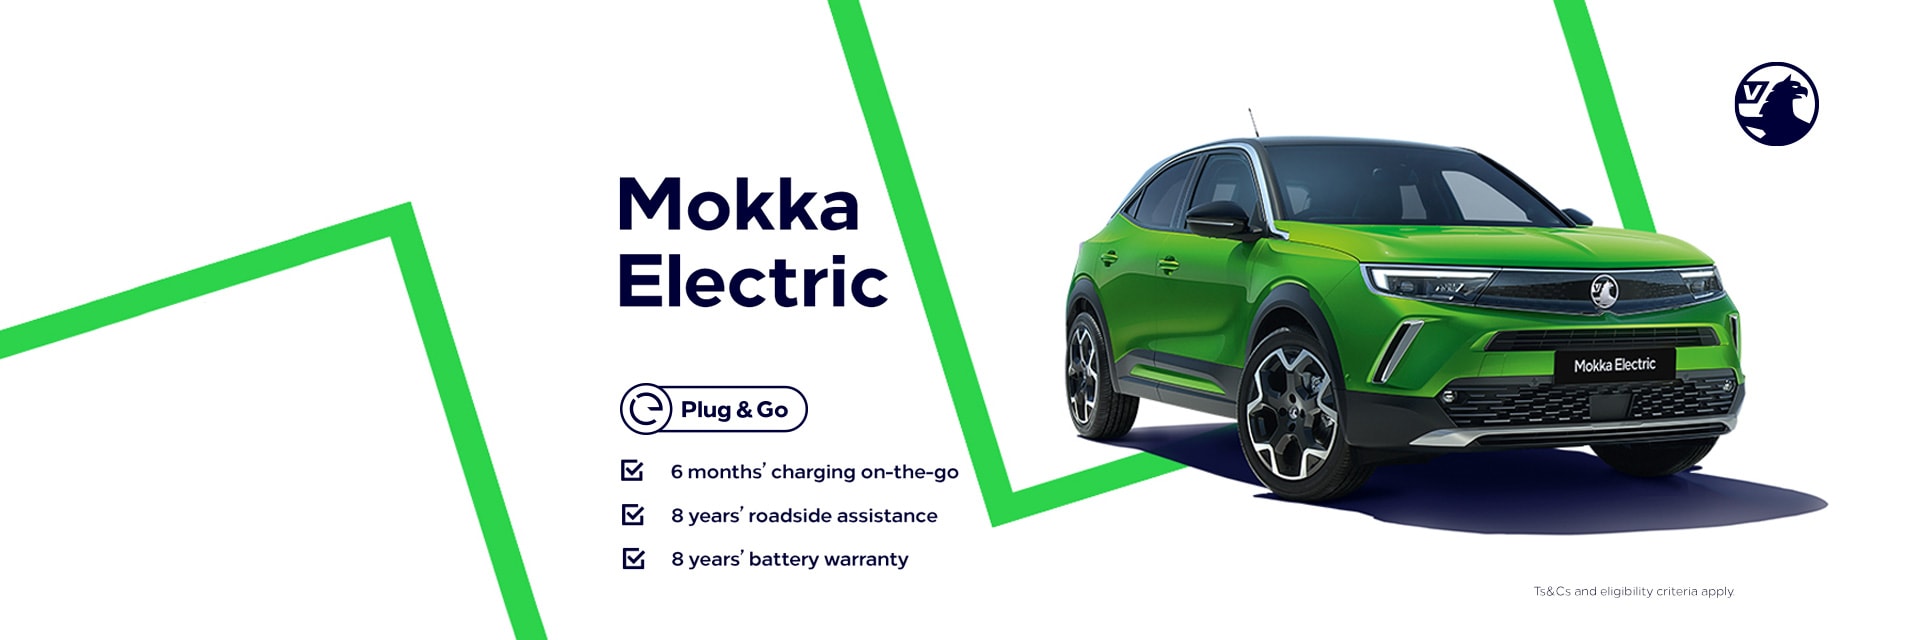 MOKKA ELECTRIC FROM £494 PER MONTH